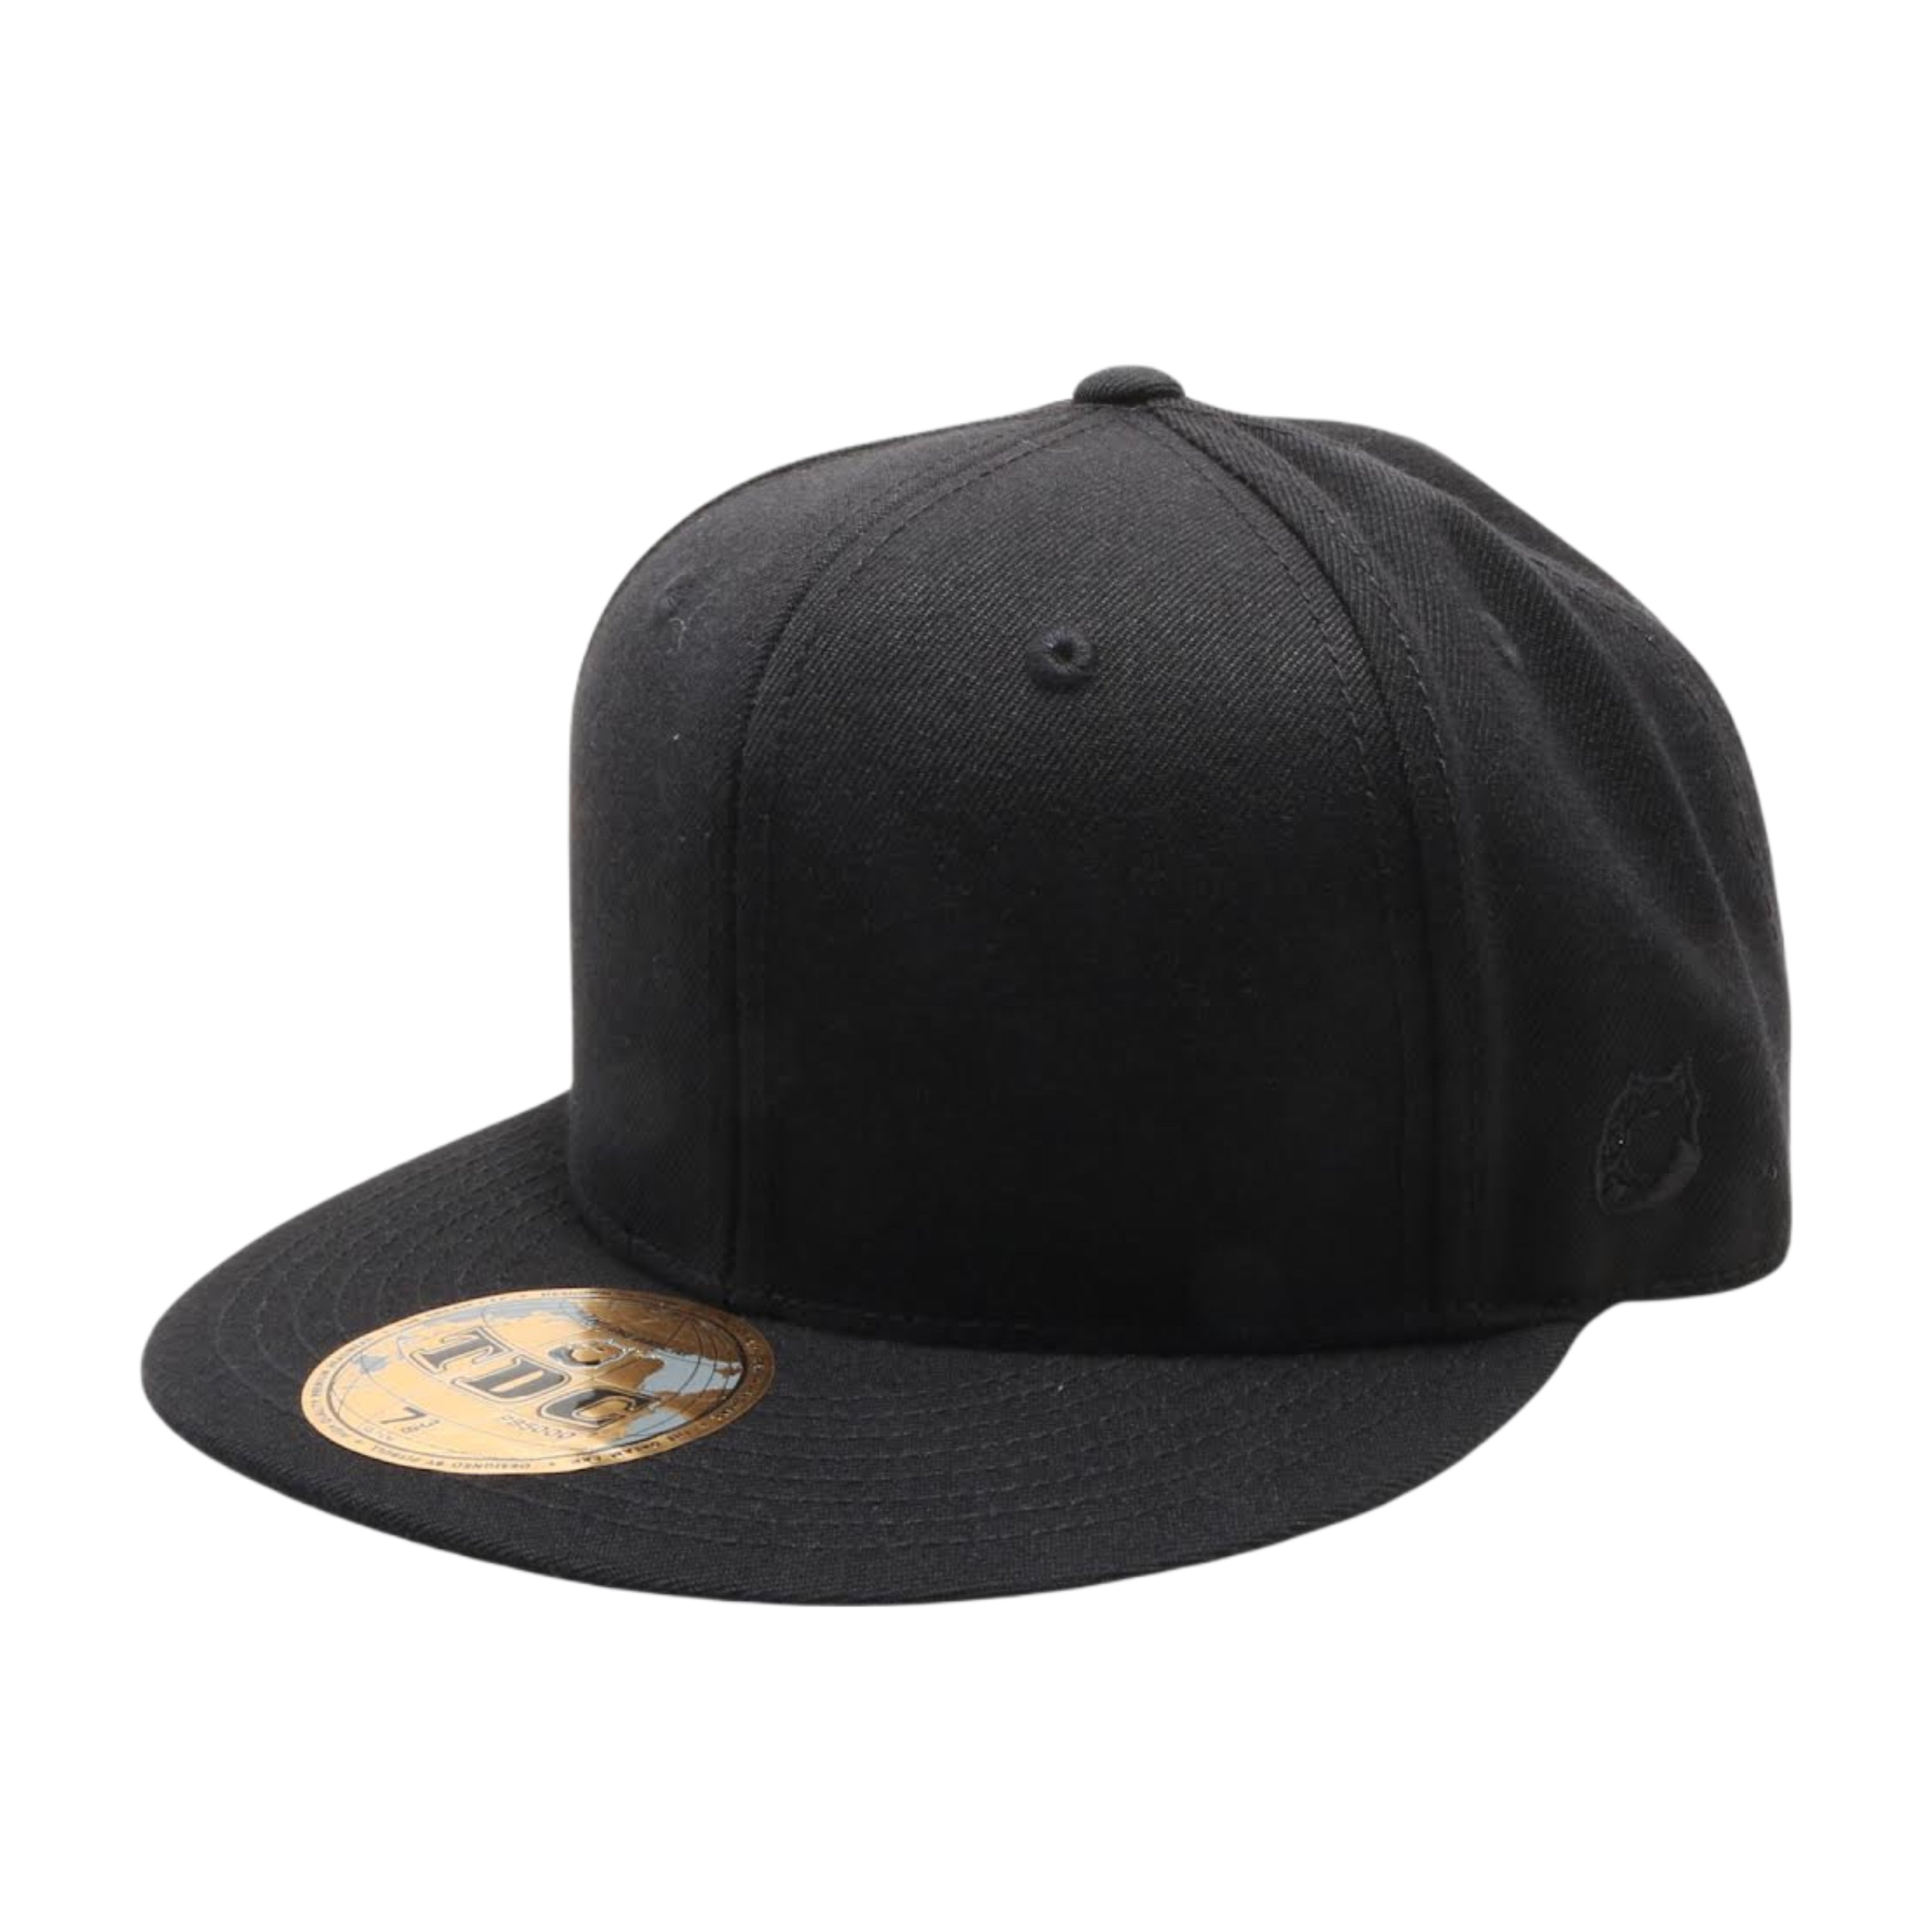 Pit Bull Plain Fitted Hat